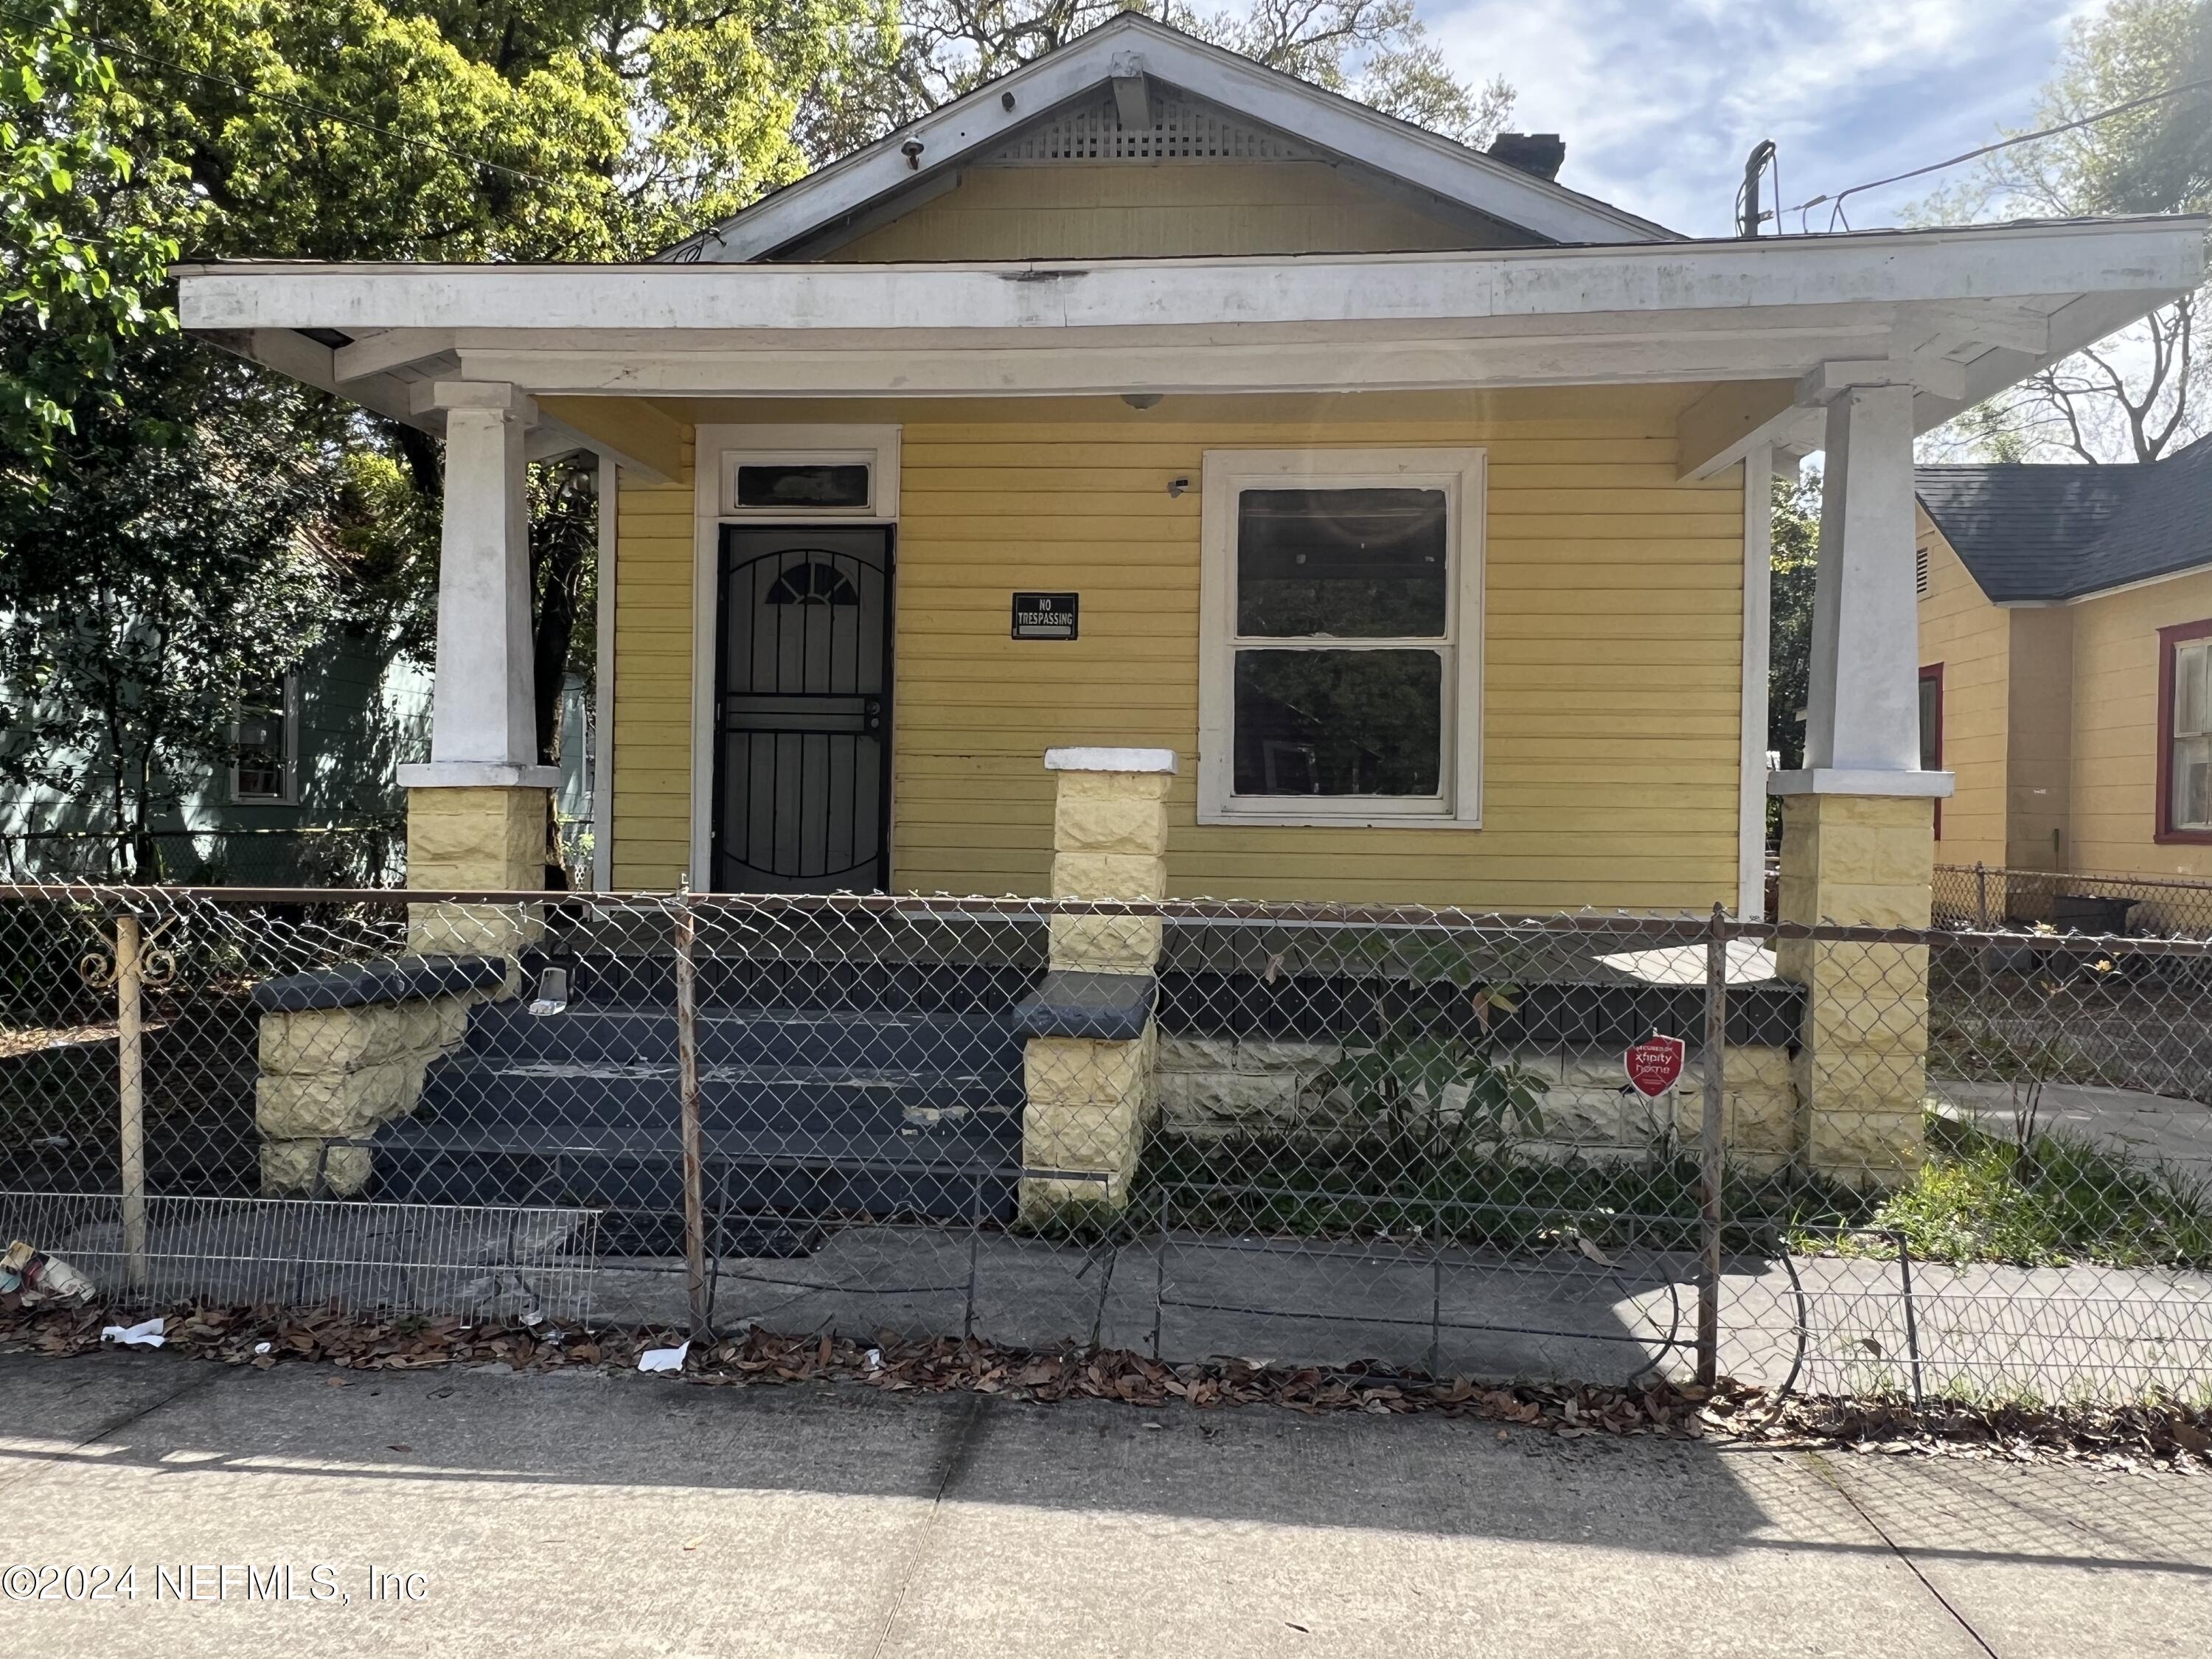 Jacksonville, FL home for sale located at 1020 E 13TH Street, Jacksonville, FL 32206